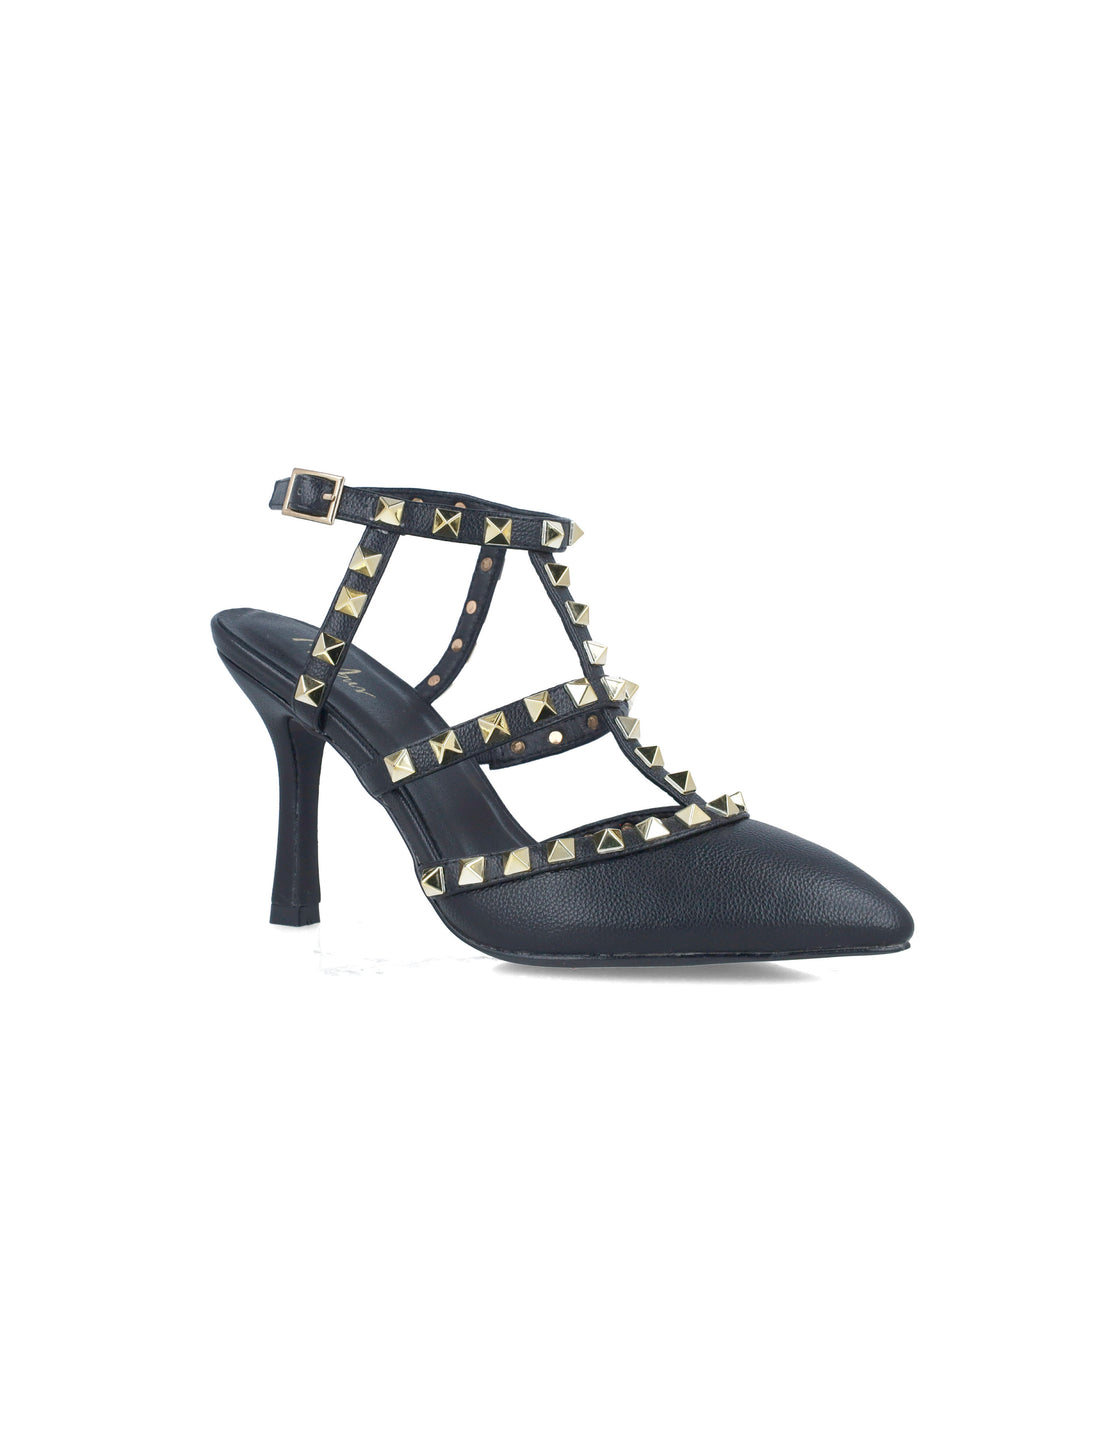 Black Studded Pumps With T-Strap_24915_01_02